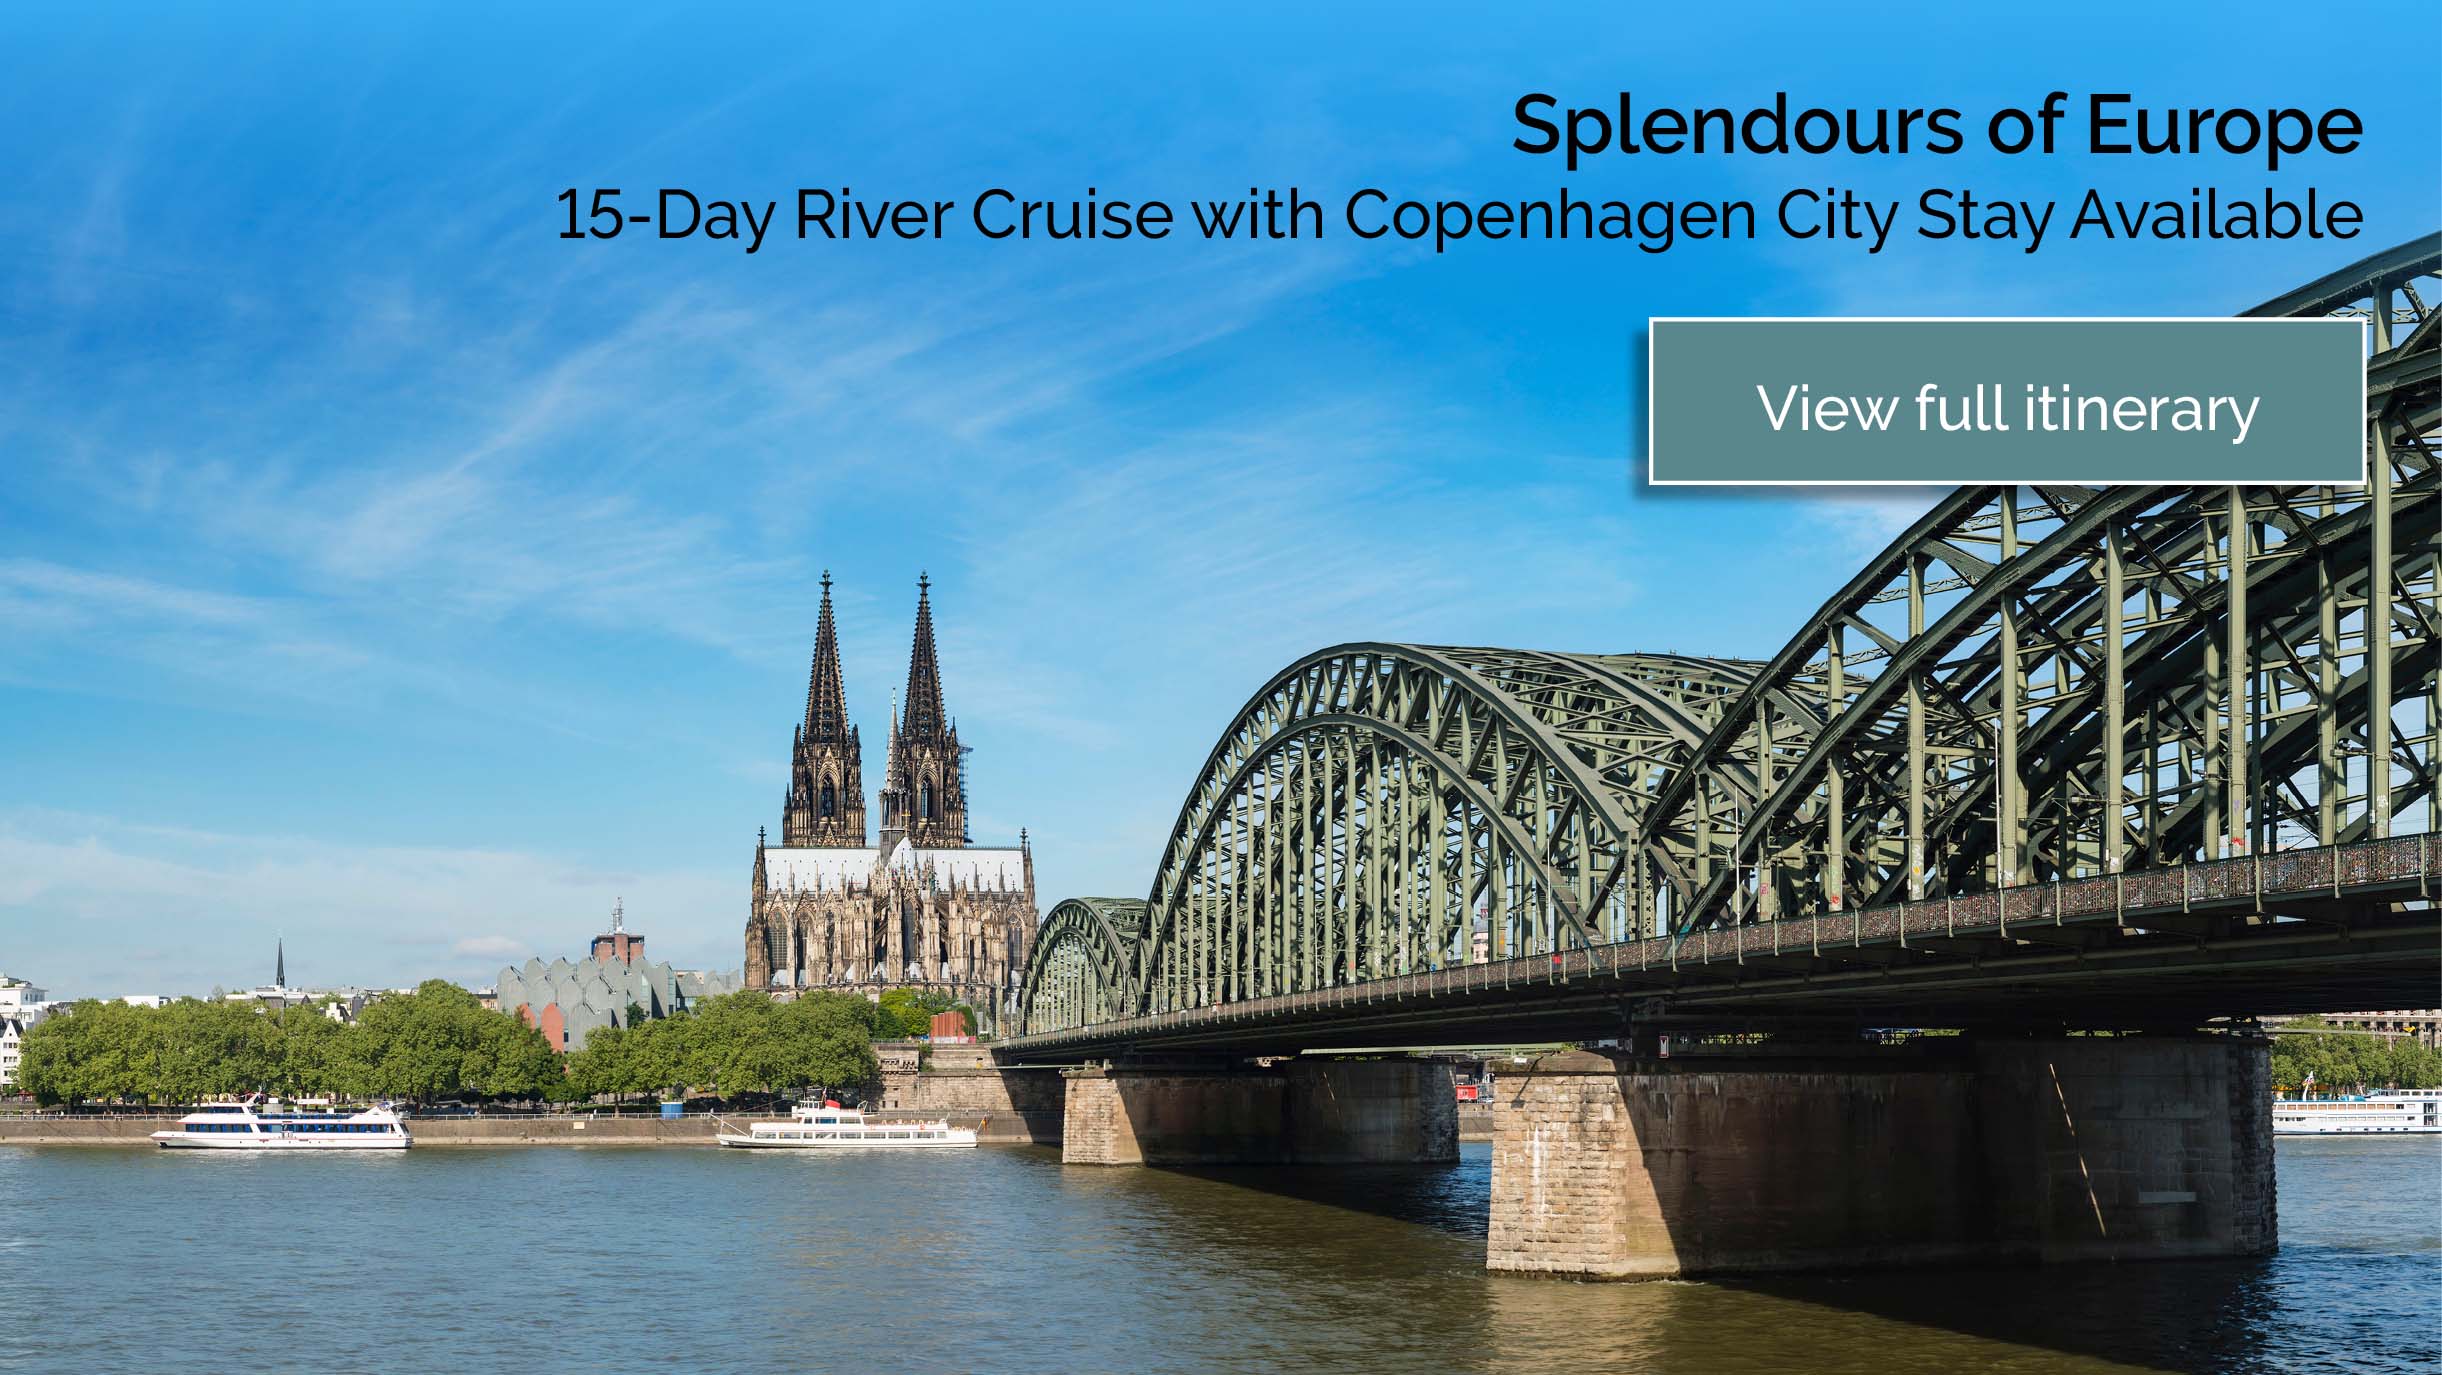 view the full Splendours of Europe 15-Day River Cruise with Copenhagen City Stay itinerary here